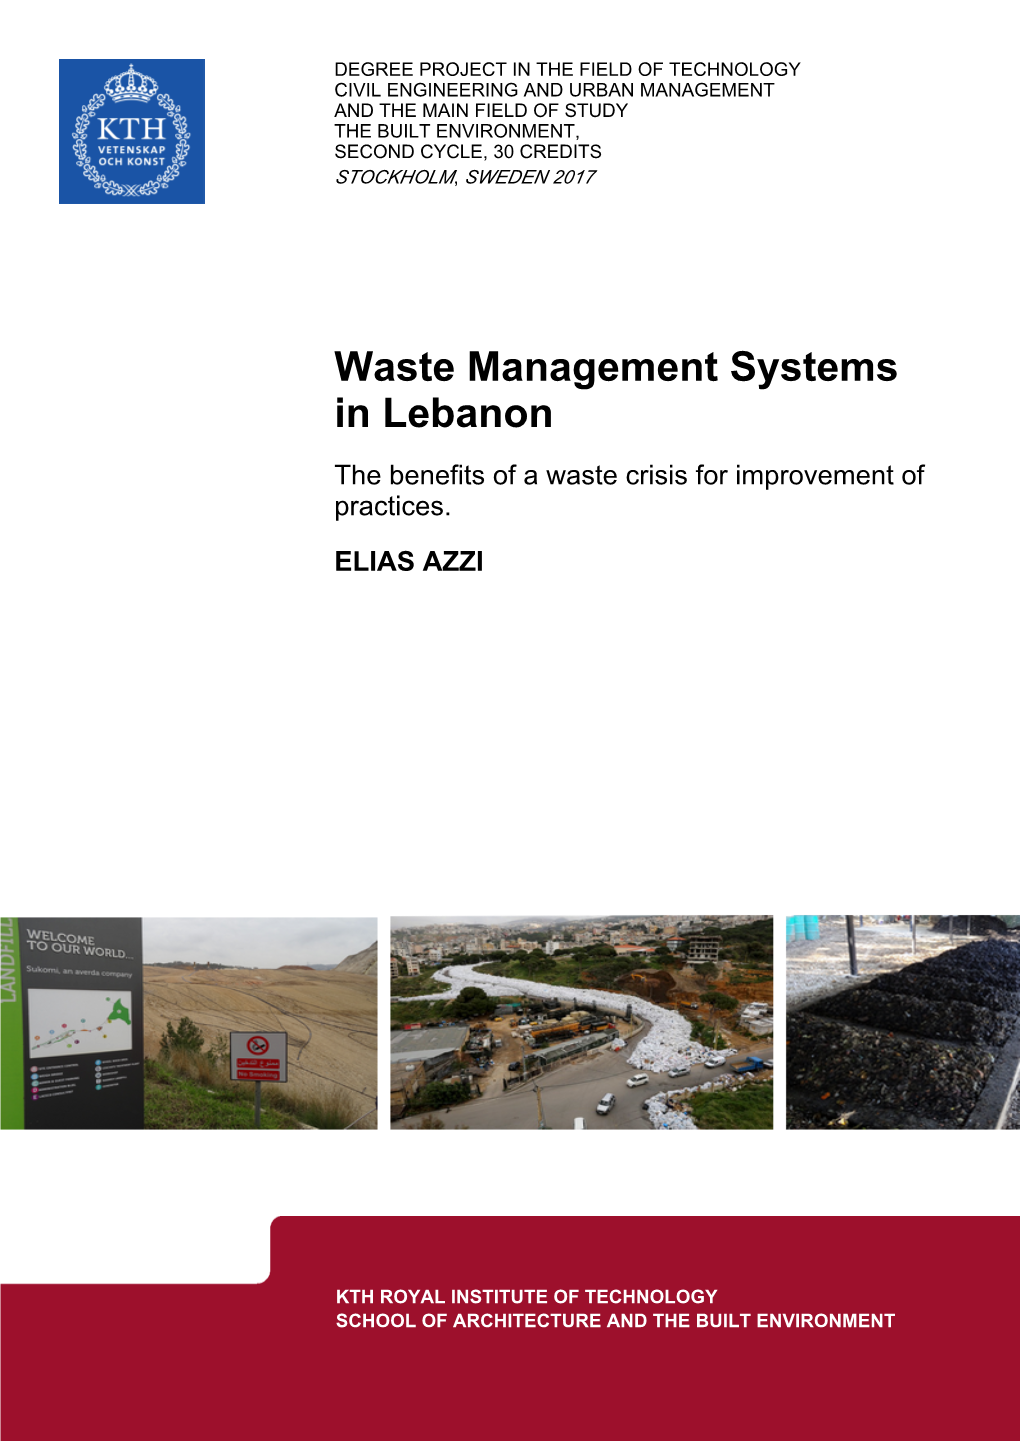 Waste Management Systems in Lebanon the Benefits of a Waste Crisis for Improvement of Practices